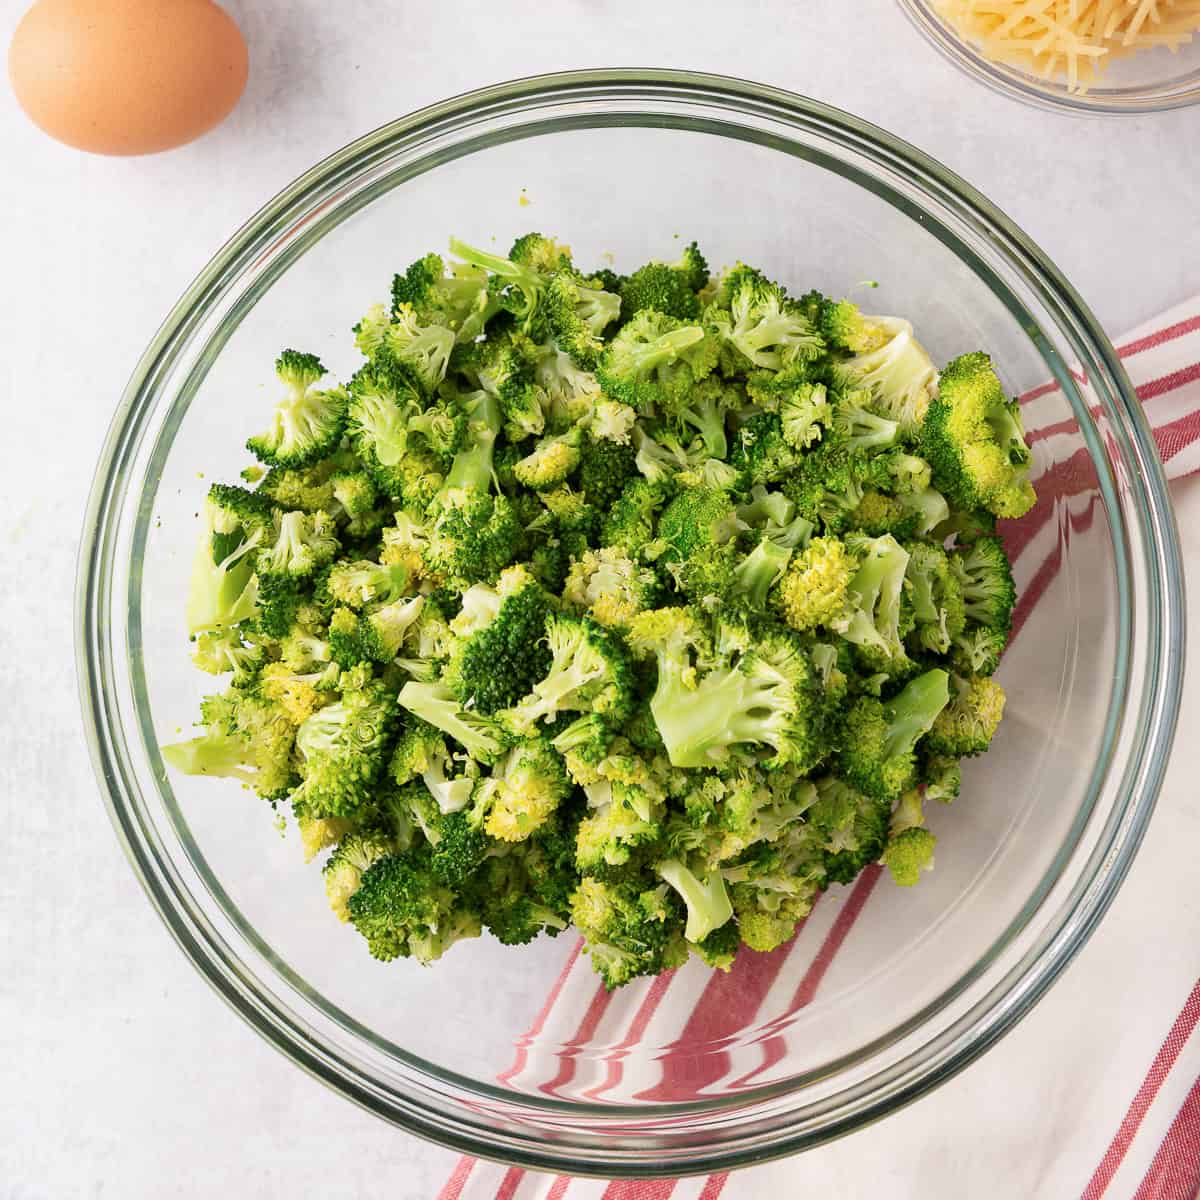 Partially cooked chopped broccoli in a glass bowl.